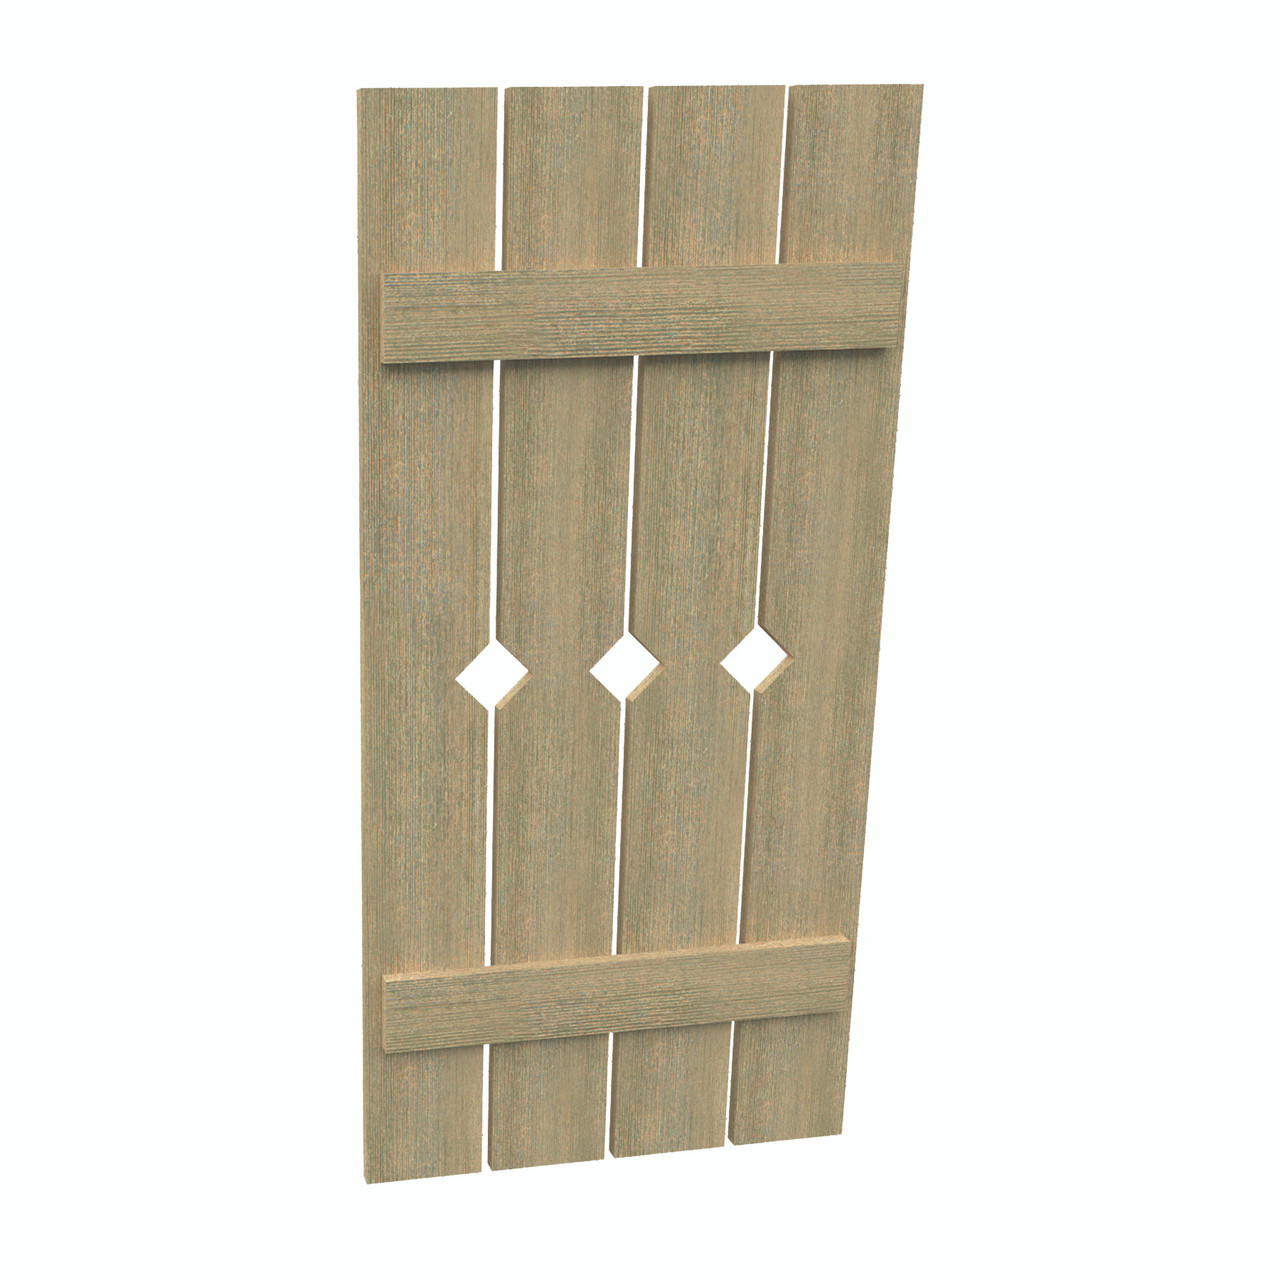 24 inch by 120 inch Plank Shutter with 4-Plank, Diamond